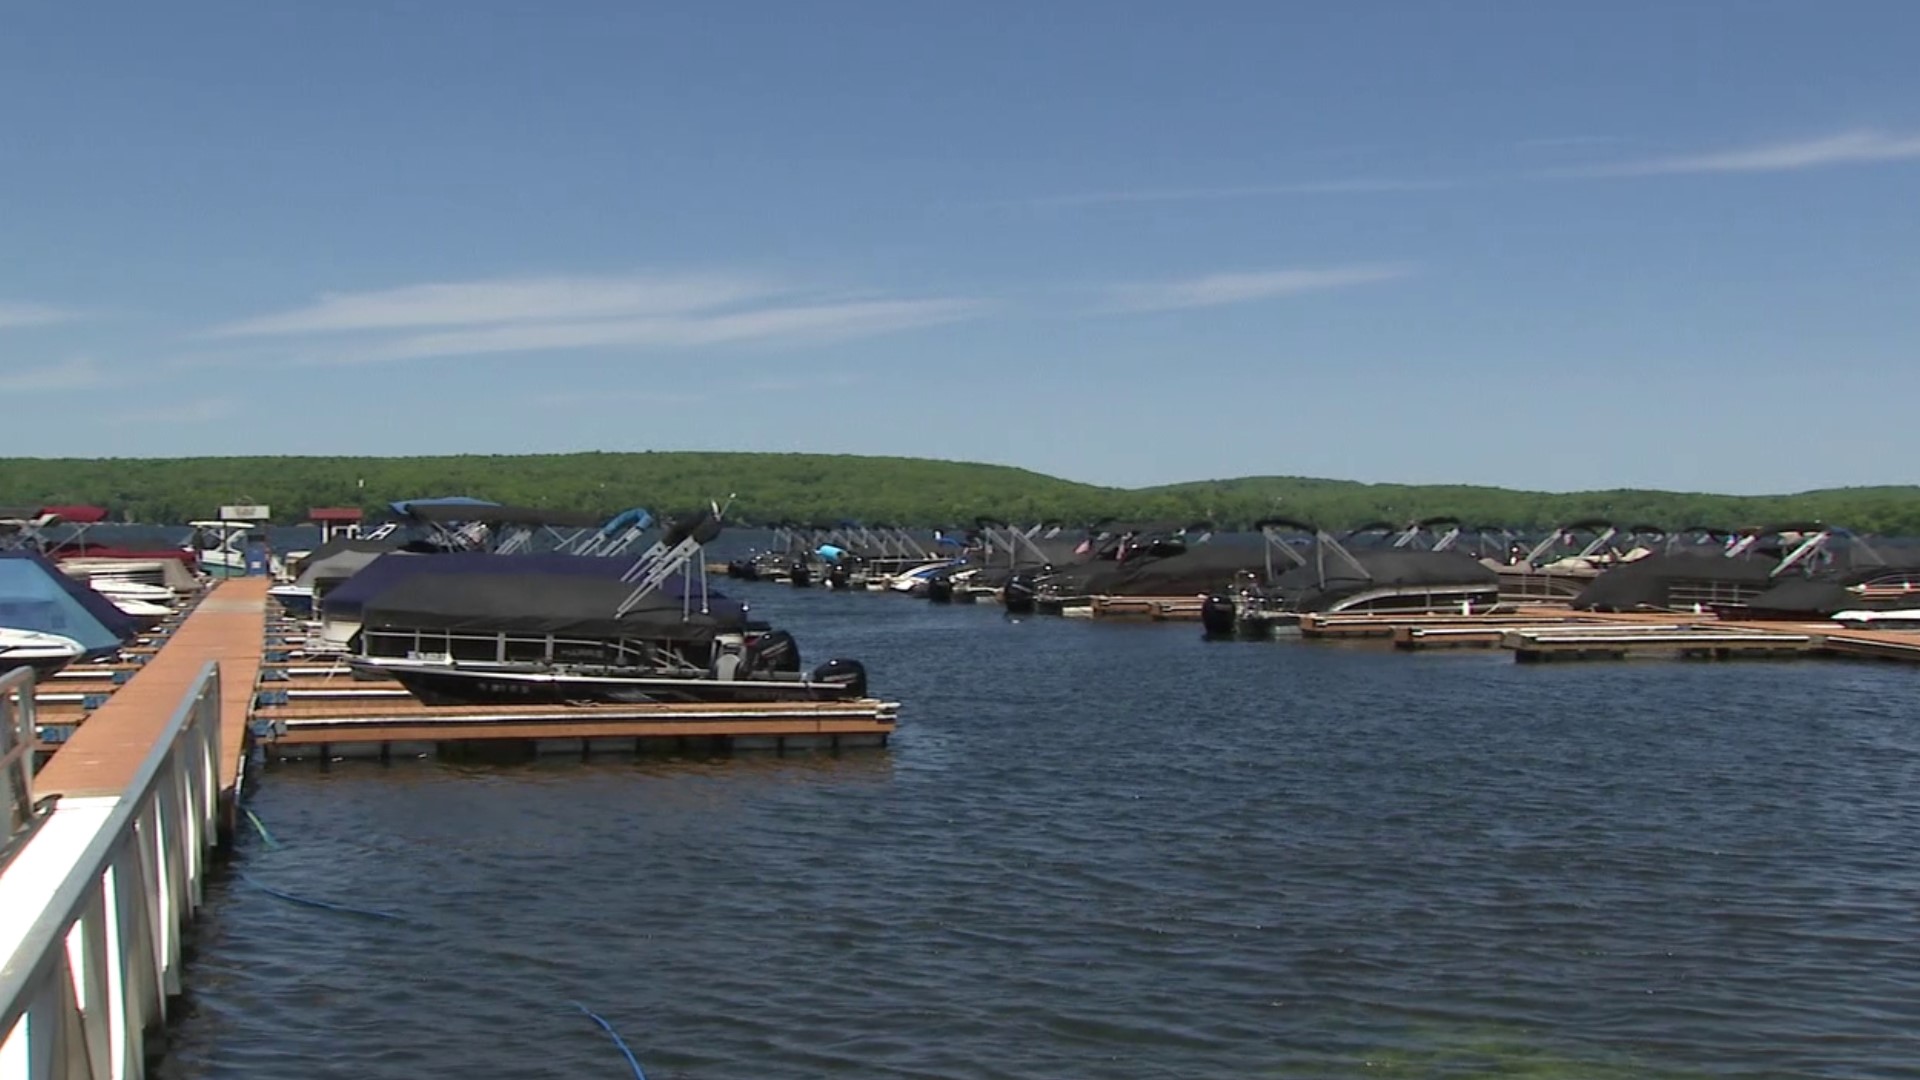 The demand for getting out on the water is just as high as it's ever been, with nearly every marina around Lake Wallenpaupack busy getting boats in the water.